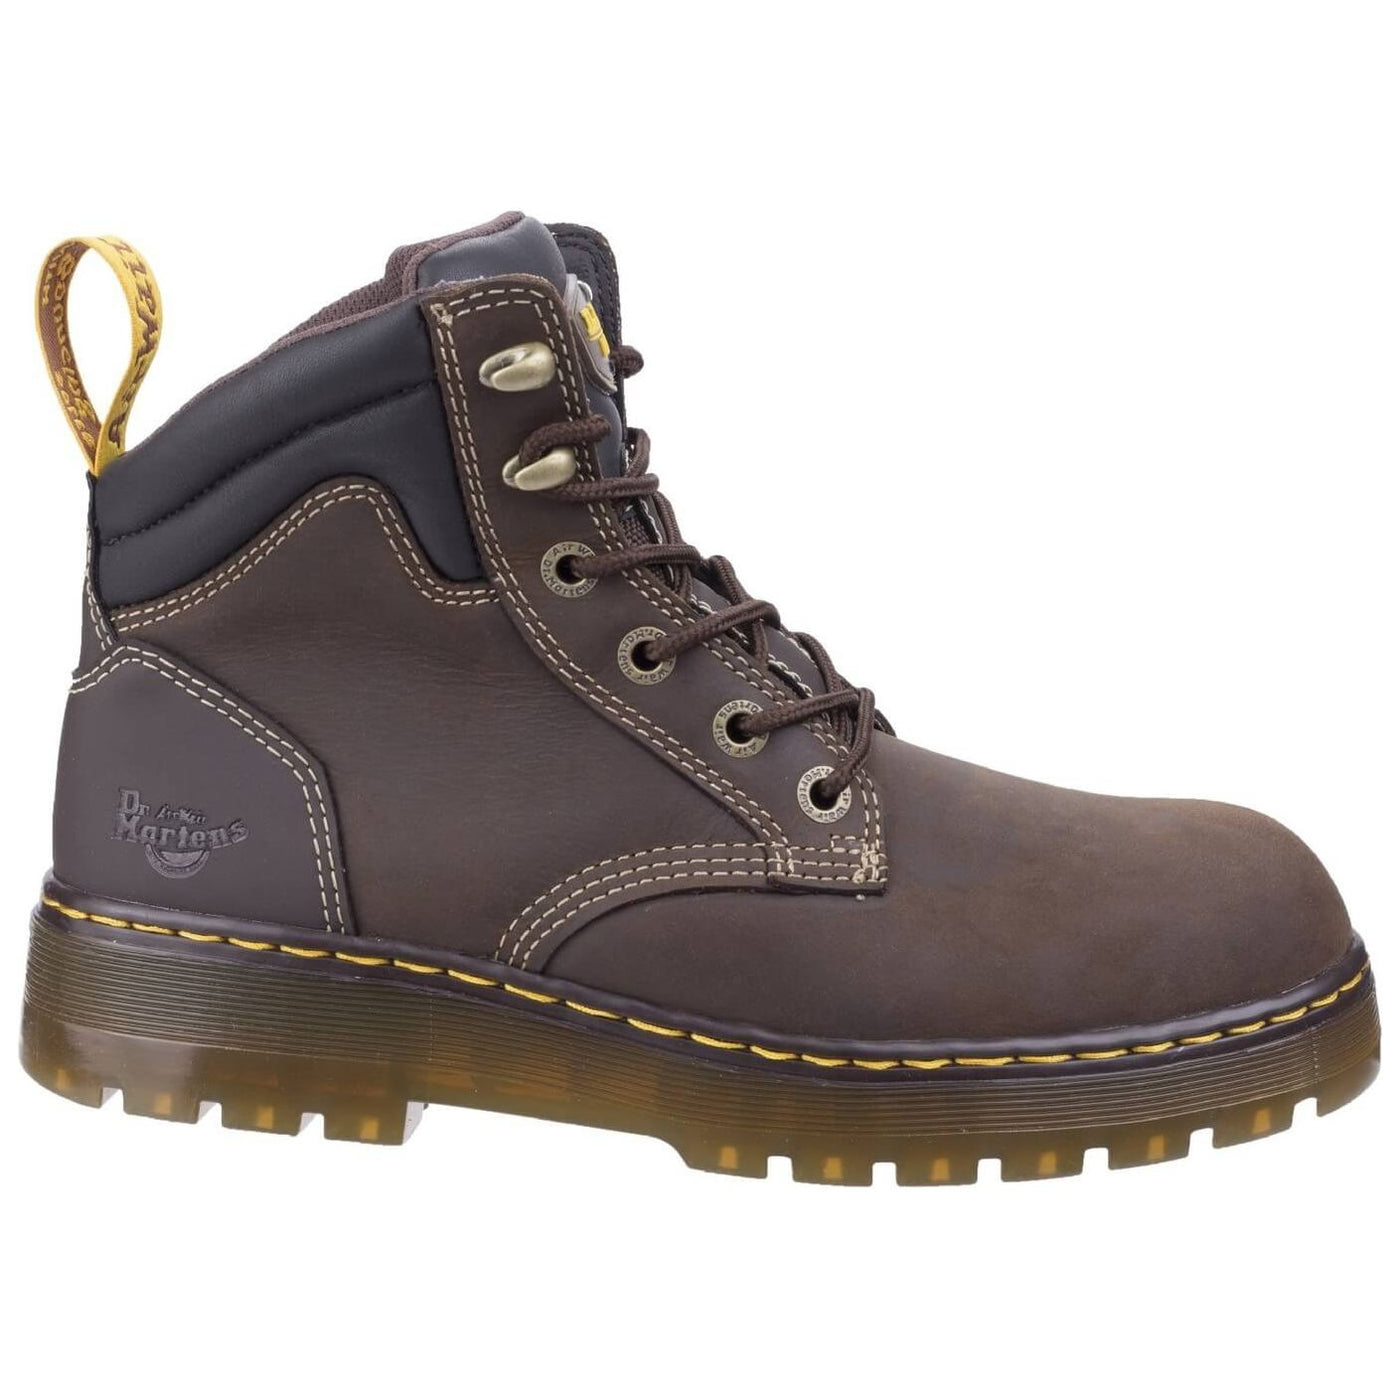 Dr Martens Brace Hiking Style Safety Boots-Dark Brown Republic-4